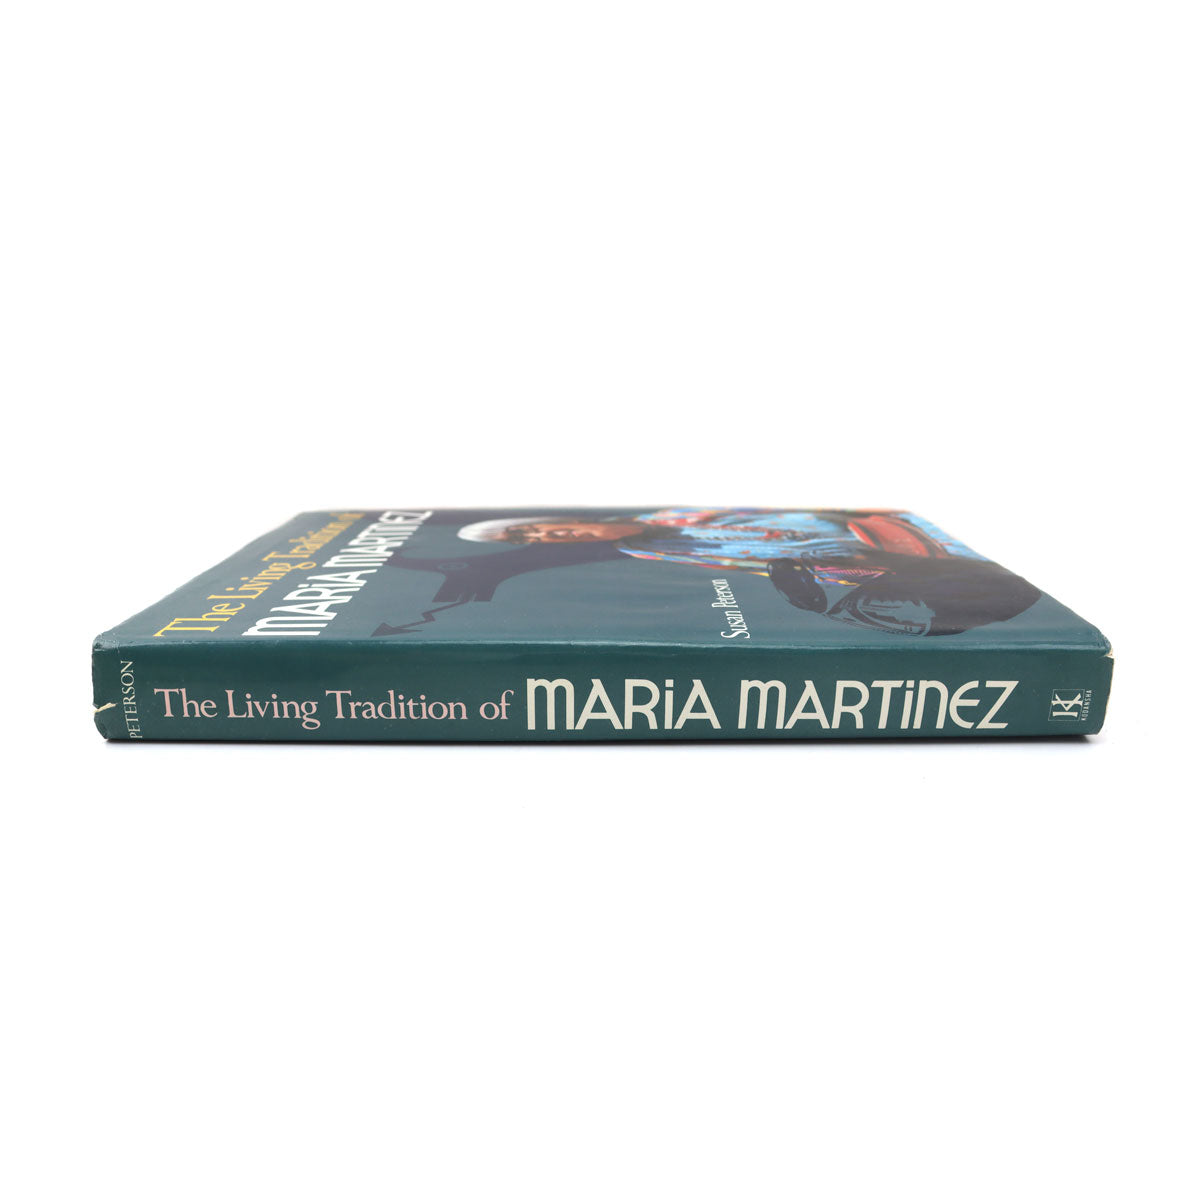 The Living Tradition of Maria Martinez by Susan Peterson (B1699)2